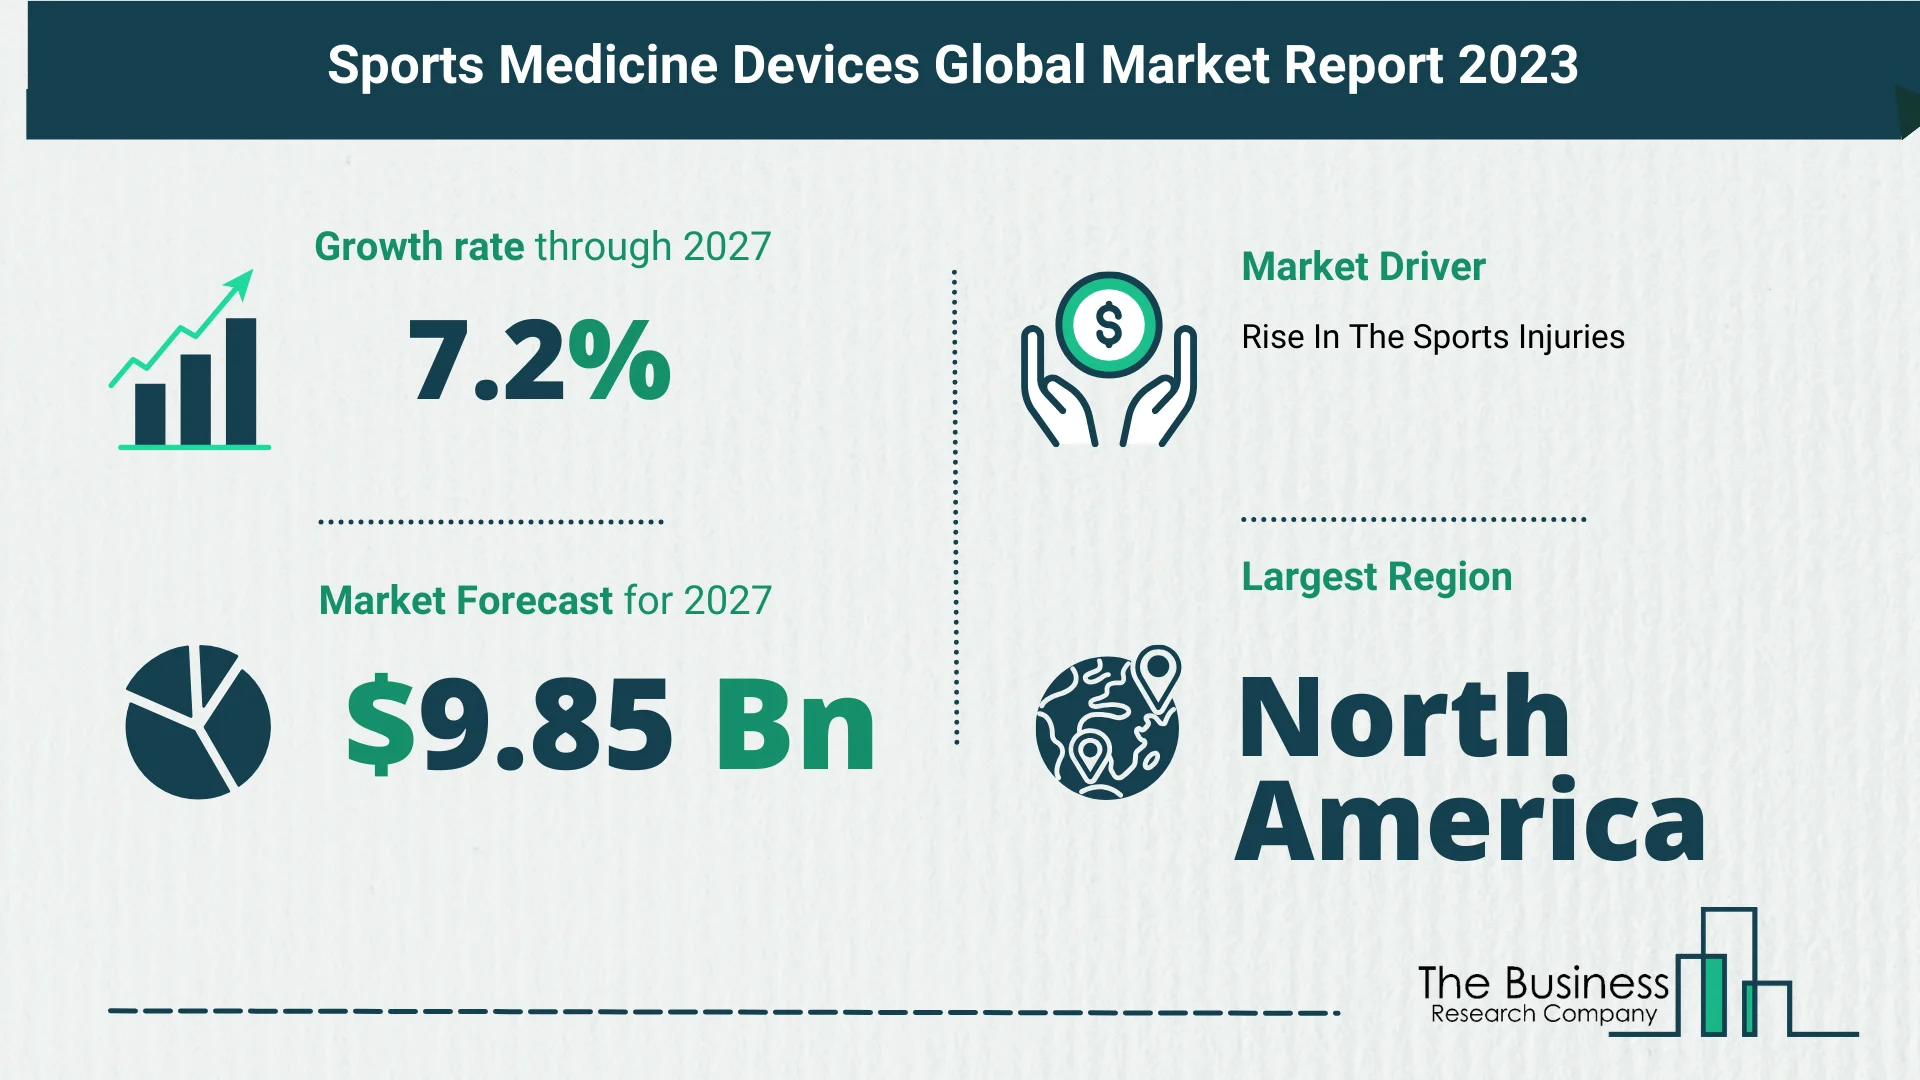 Sports Medicine Devices Market Overview: Market Size, Drivers And Trends